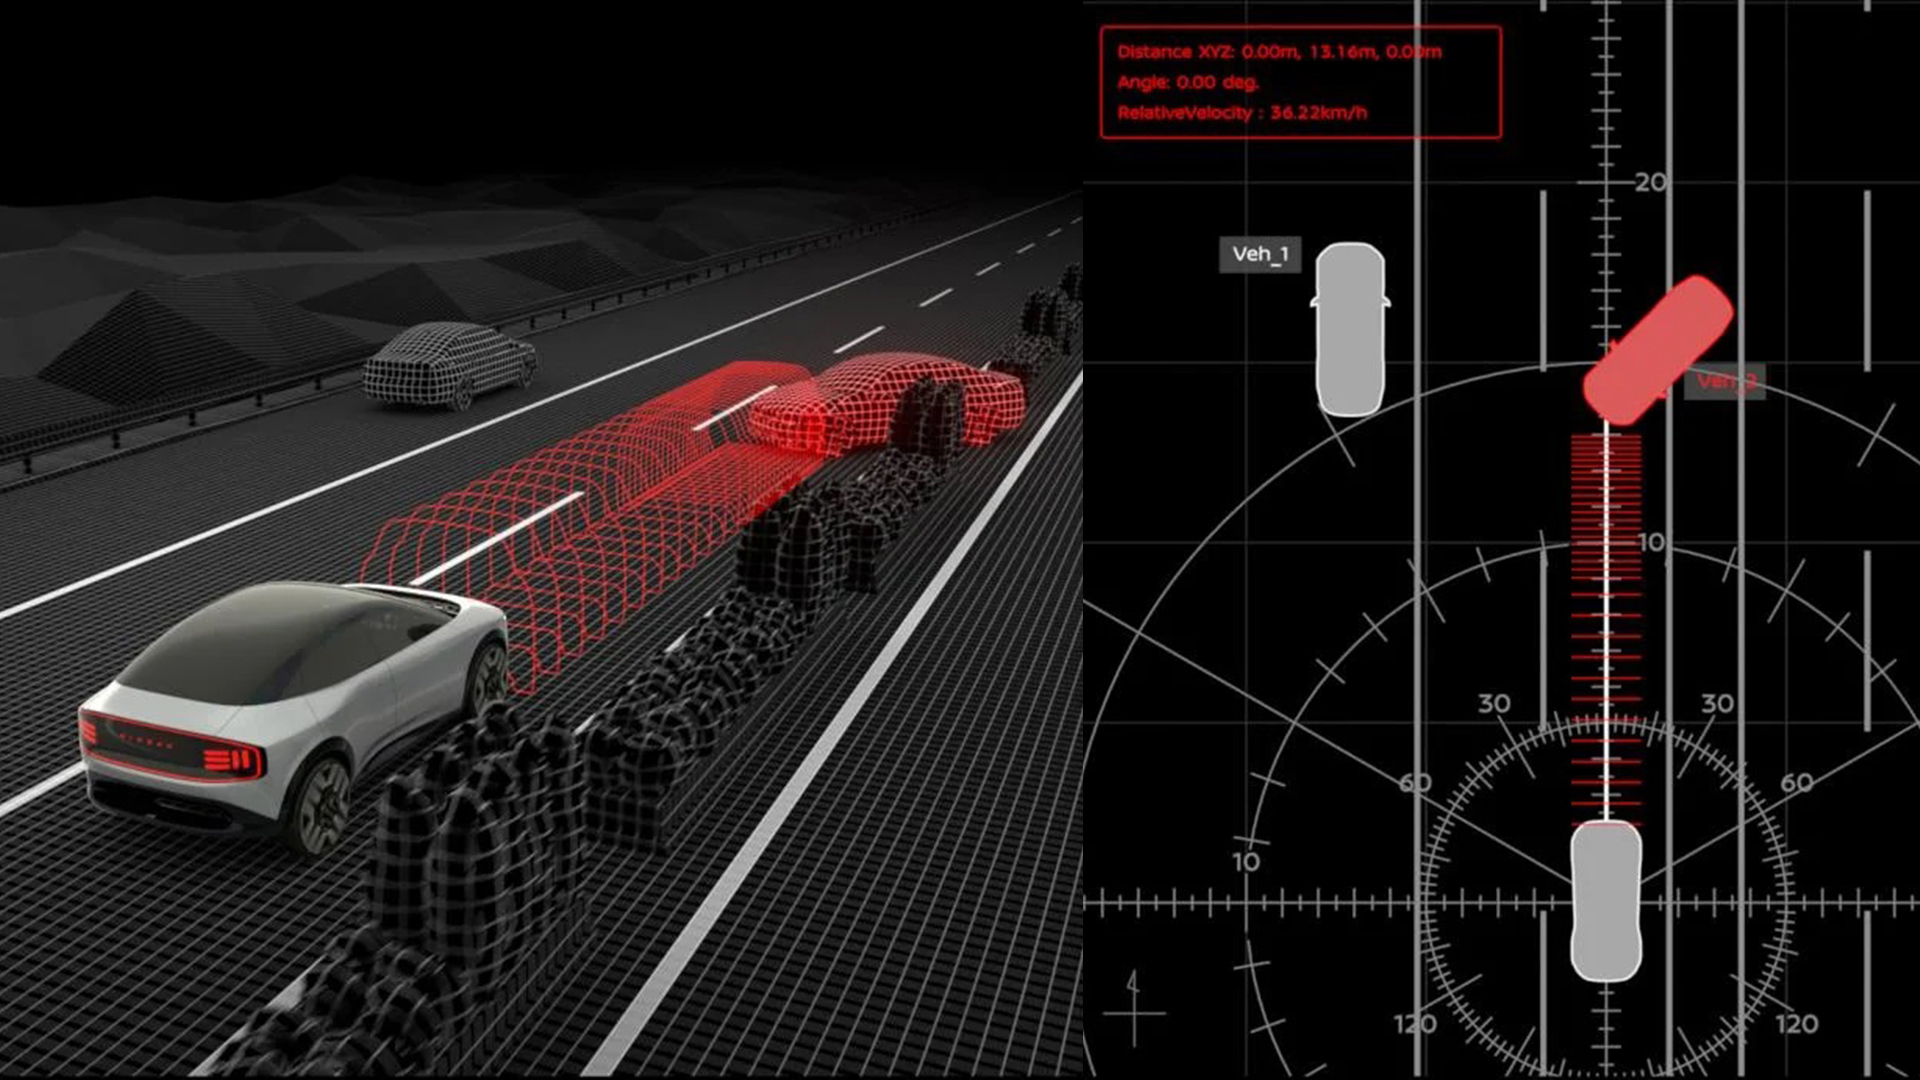 The car advances through a computer virtual path, which permanently records data about it, in order to perform an eventual evasive maneuver while keeping in mind its surroundings.